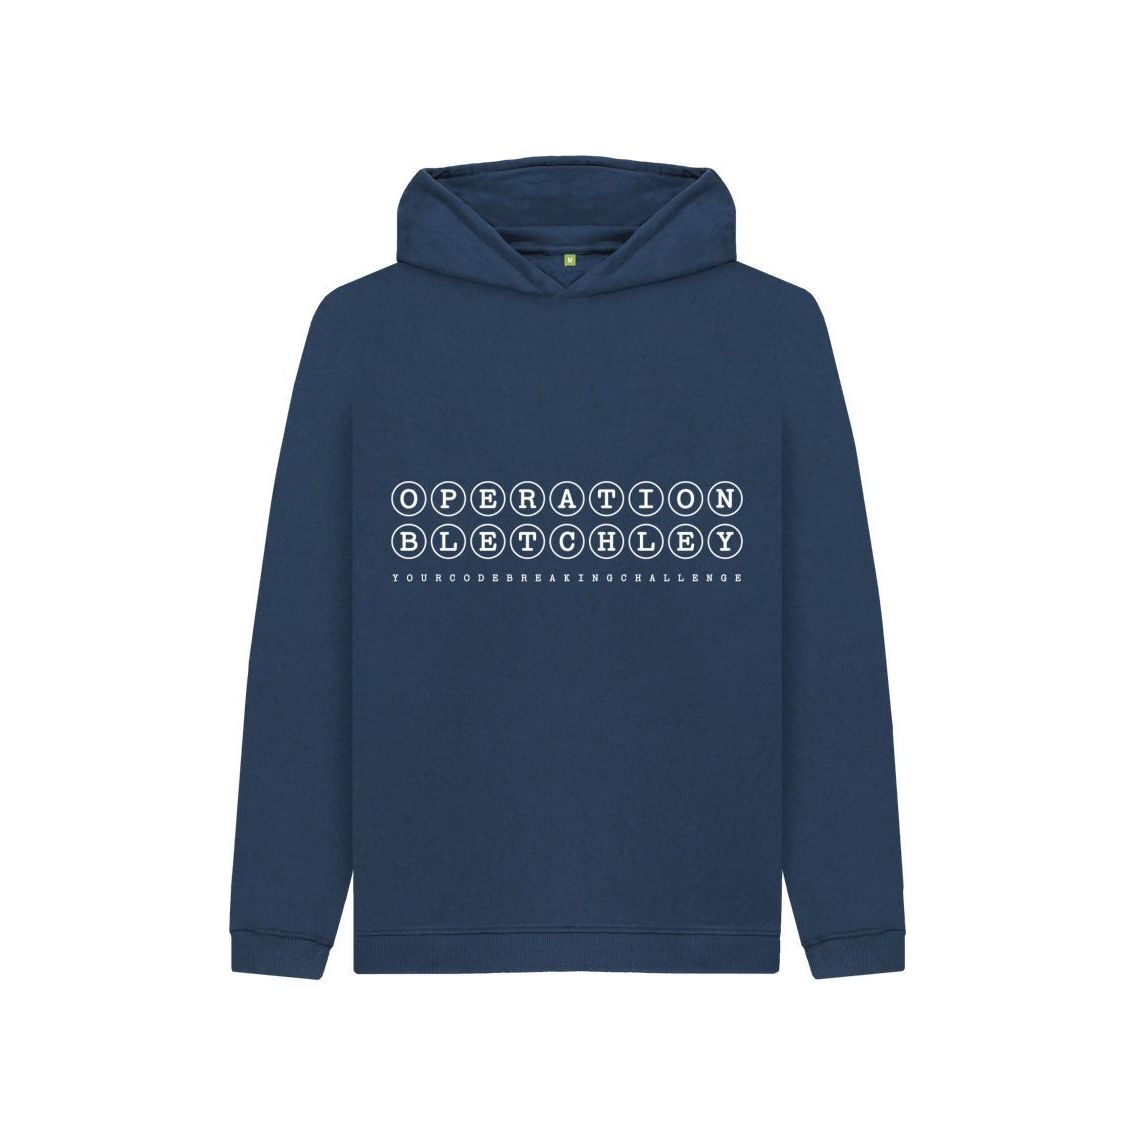 Operation Bletchley kids unisex hoodie - ABF The Soldiers' Charity Shop